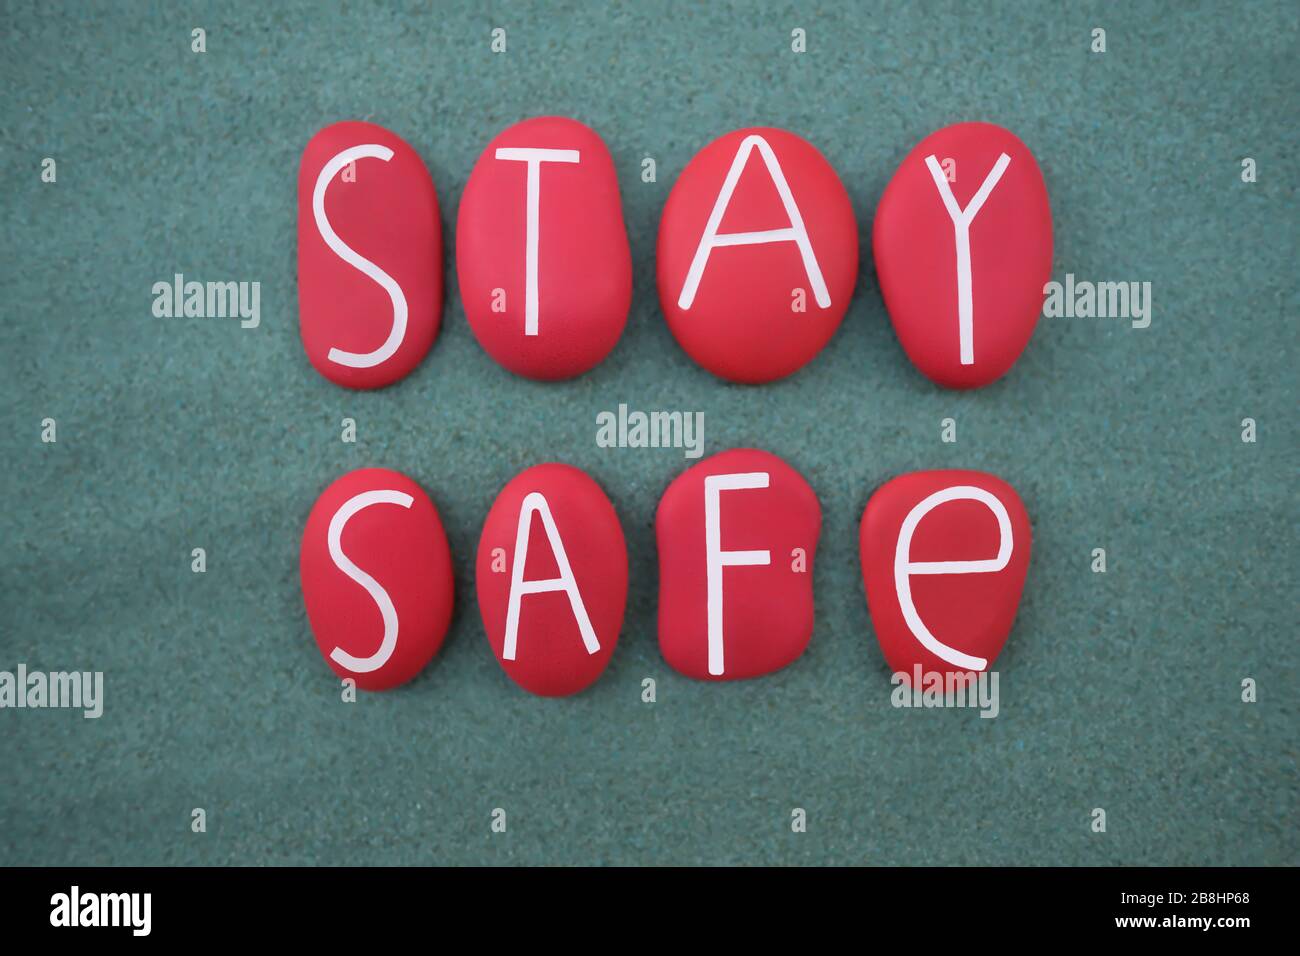 Stay Safe, creative slogan composed with red colored painted stone letters over green sand Stock Photo